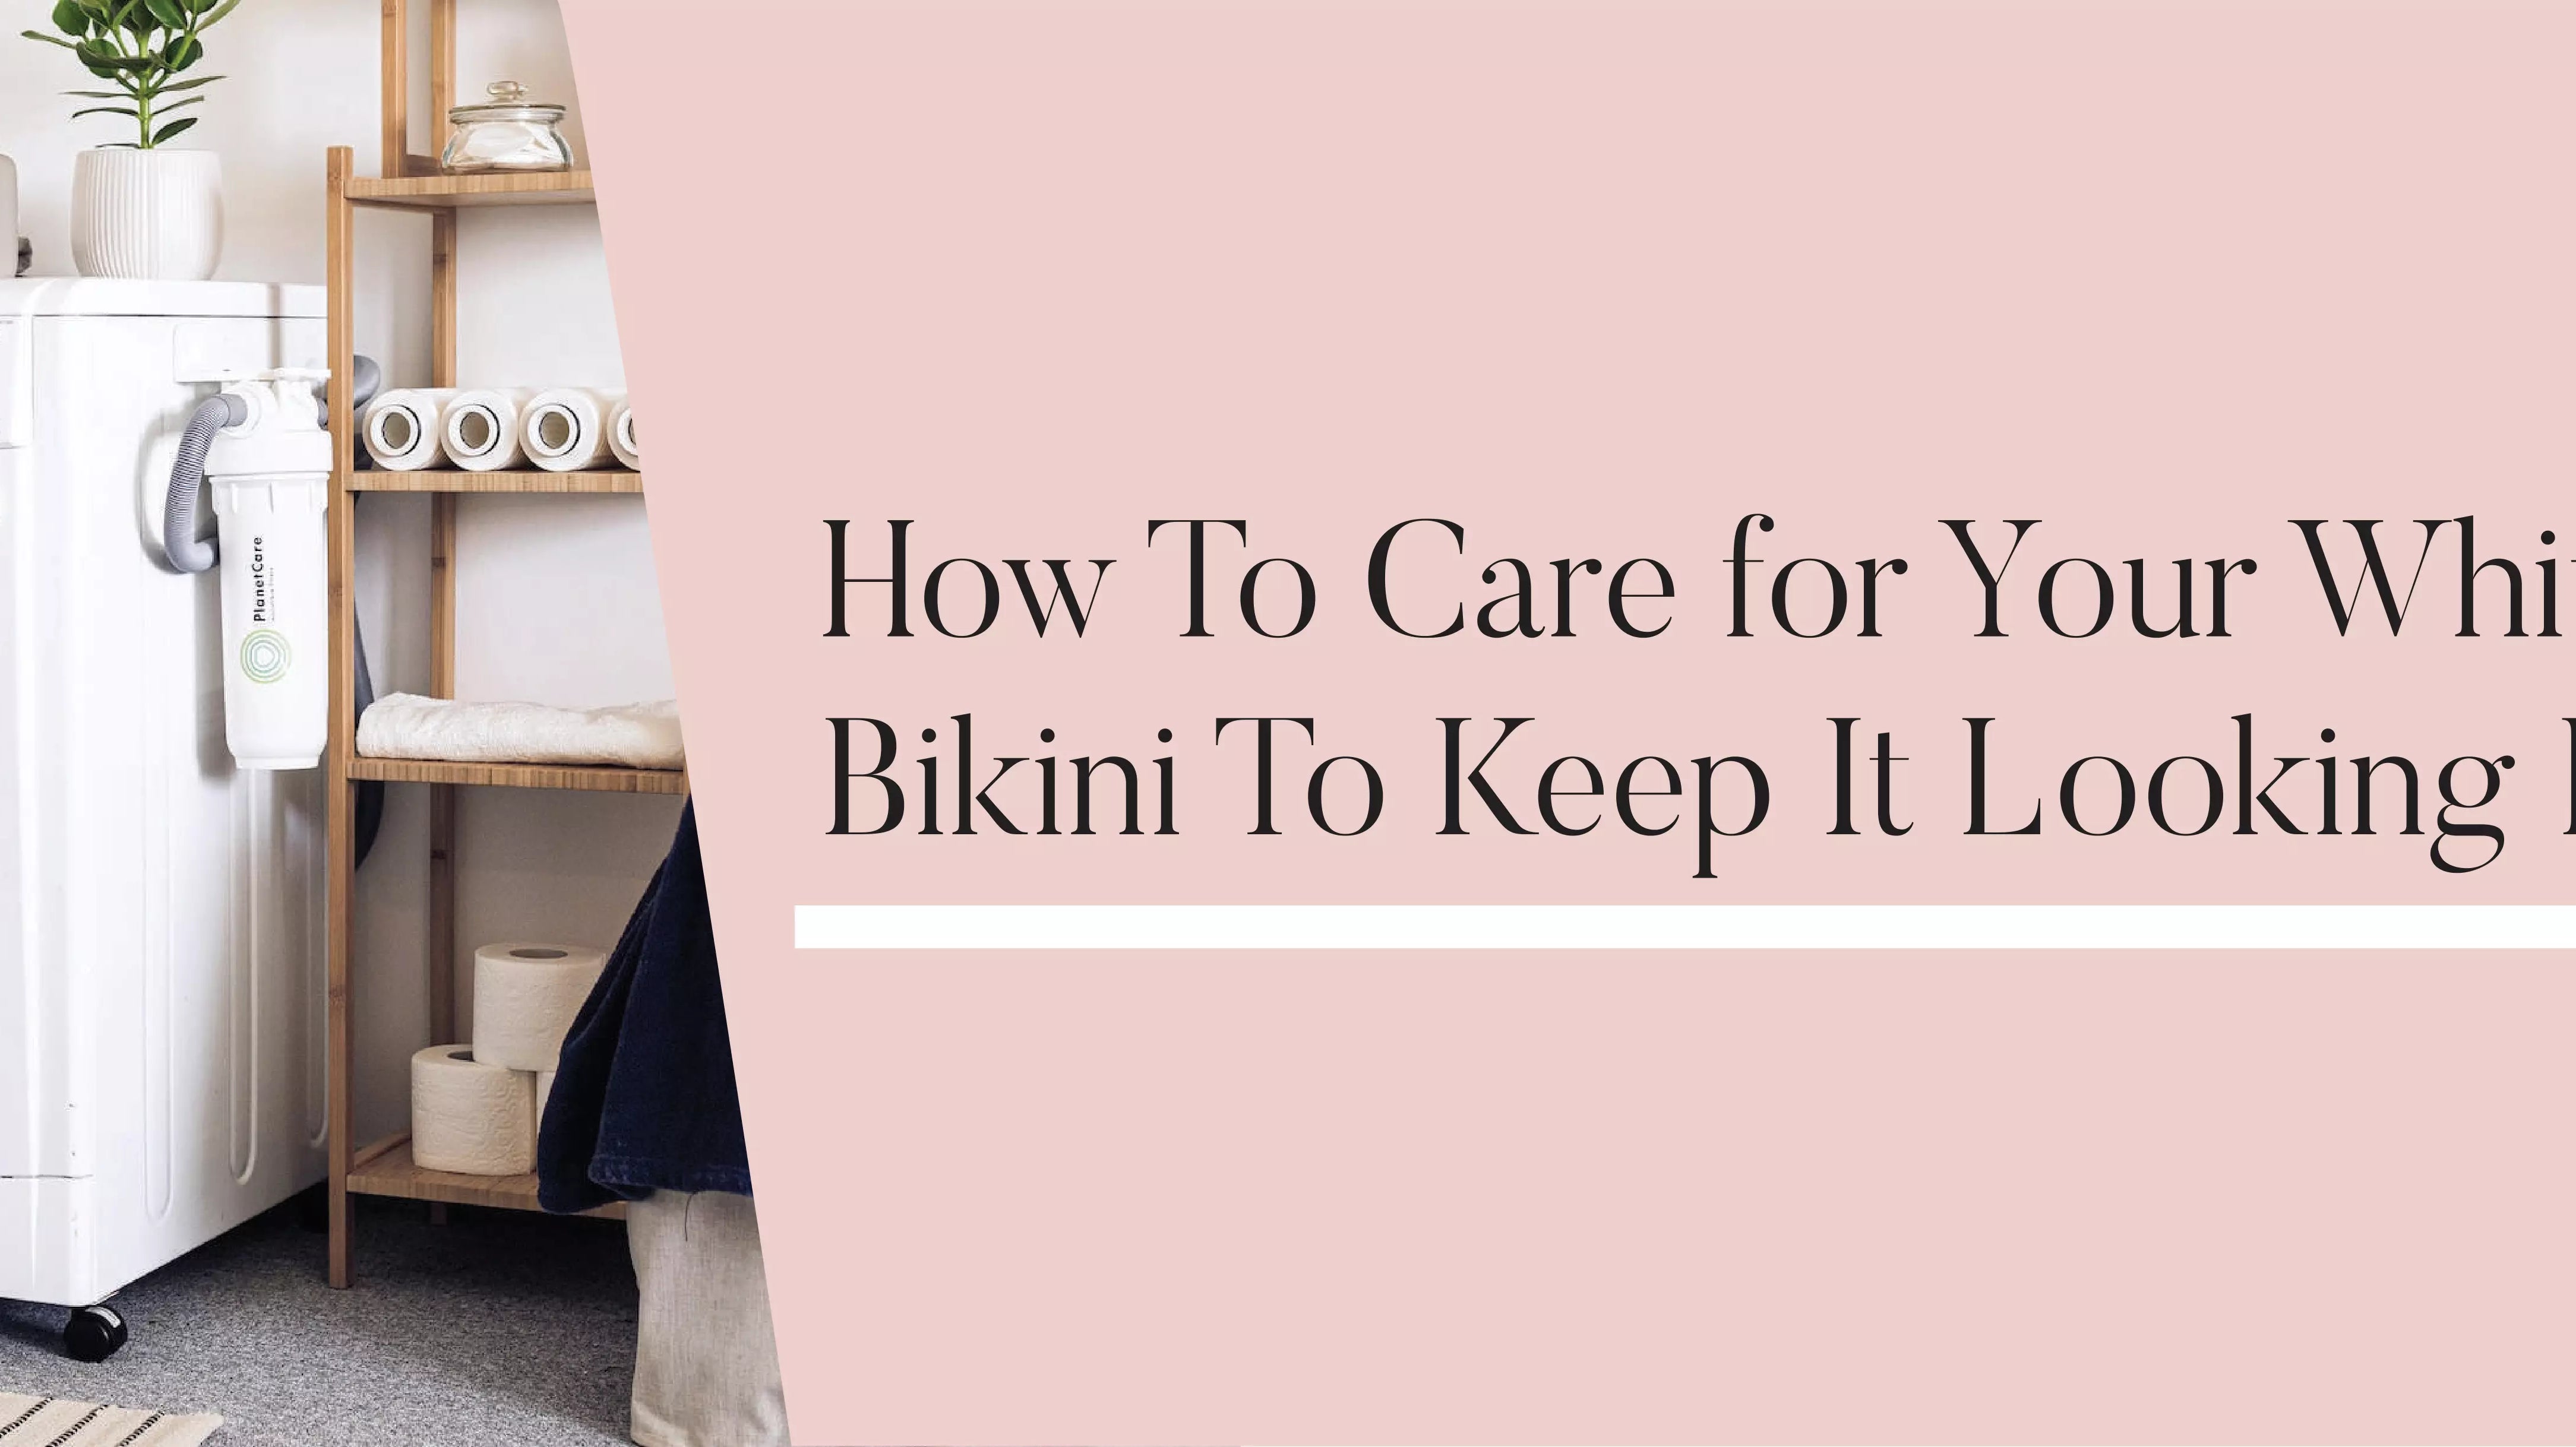 How To Care for Your White Bridal Bikini To Keep It Looking Like New